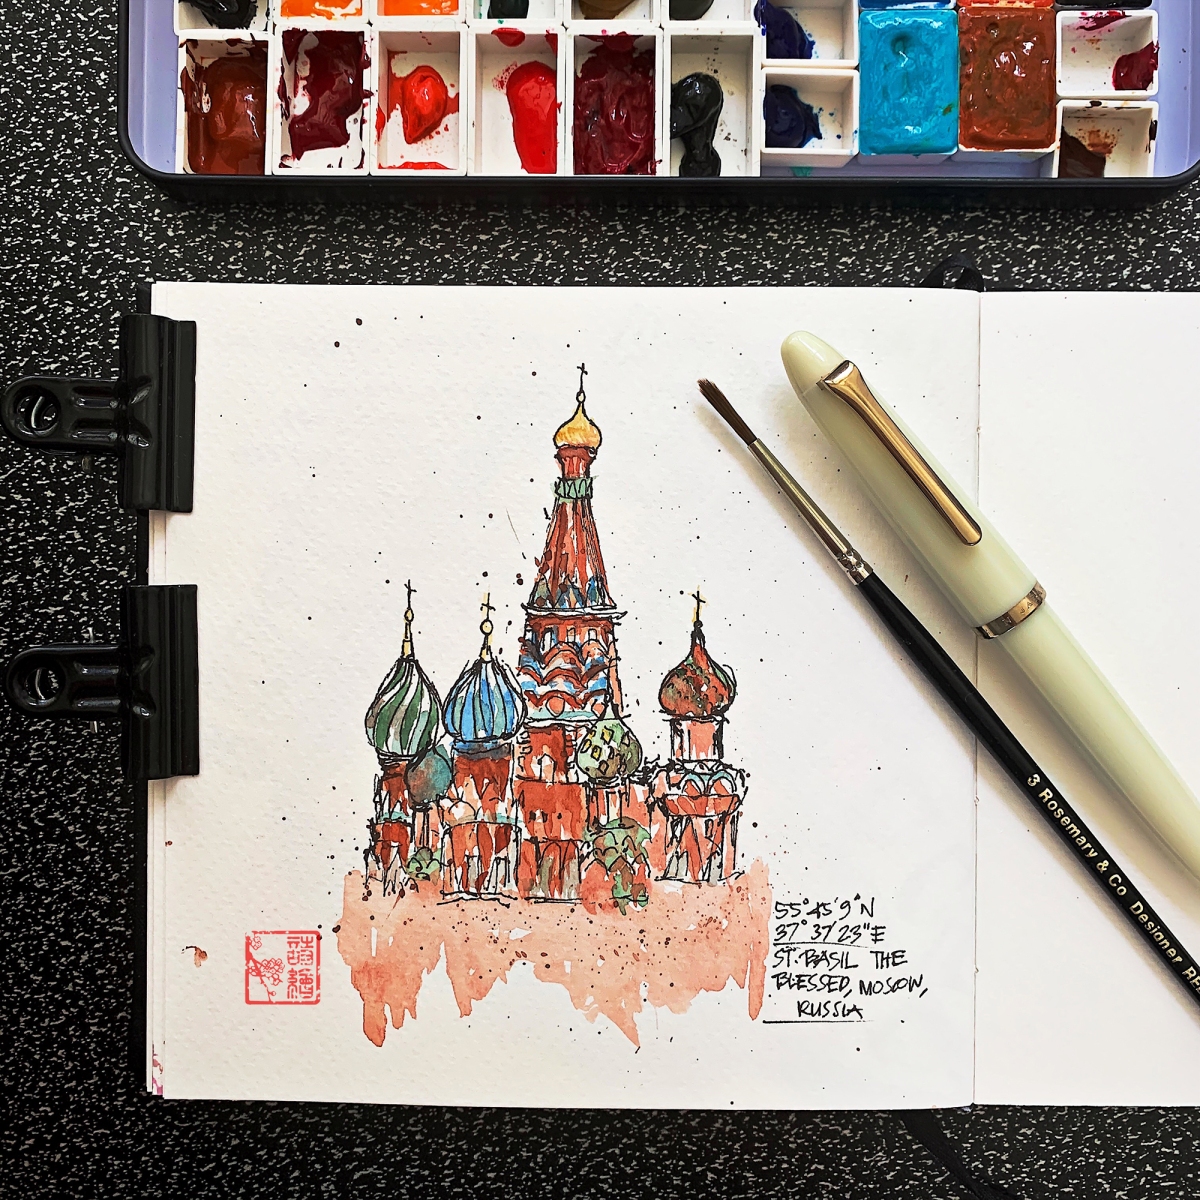 Saint Basil’s Cathedral, Russia